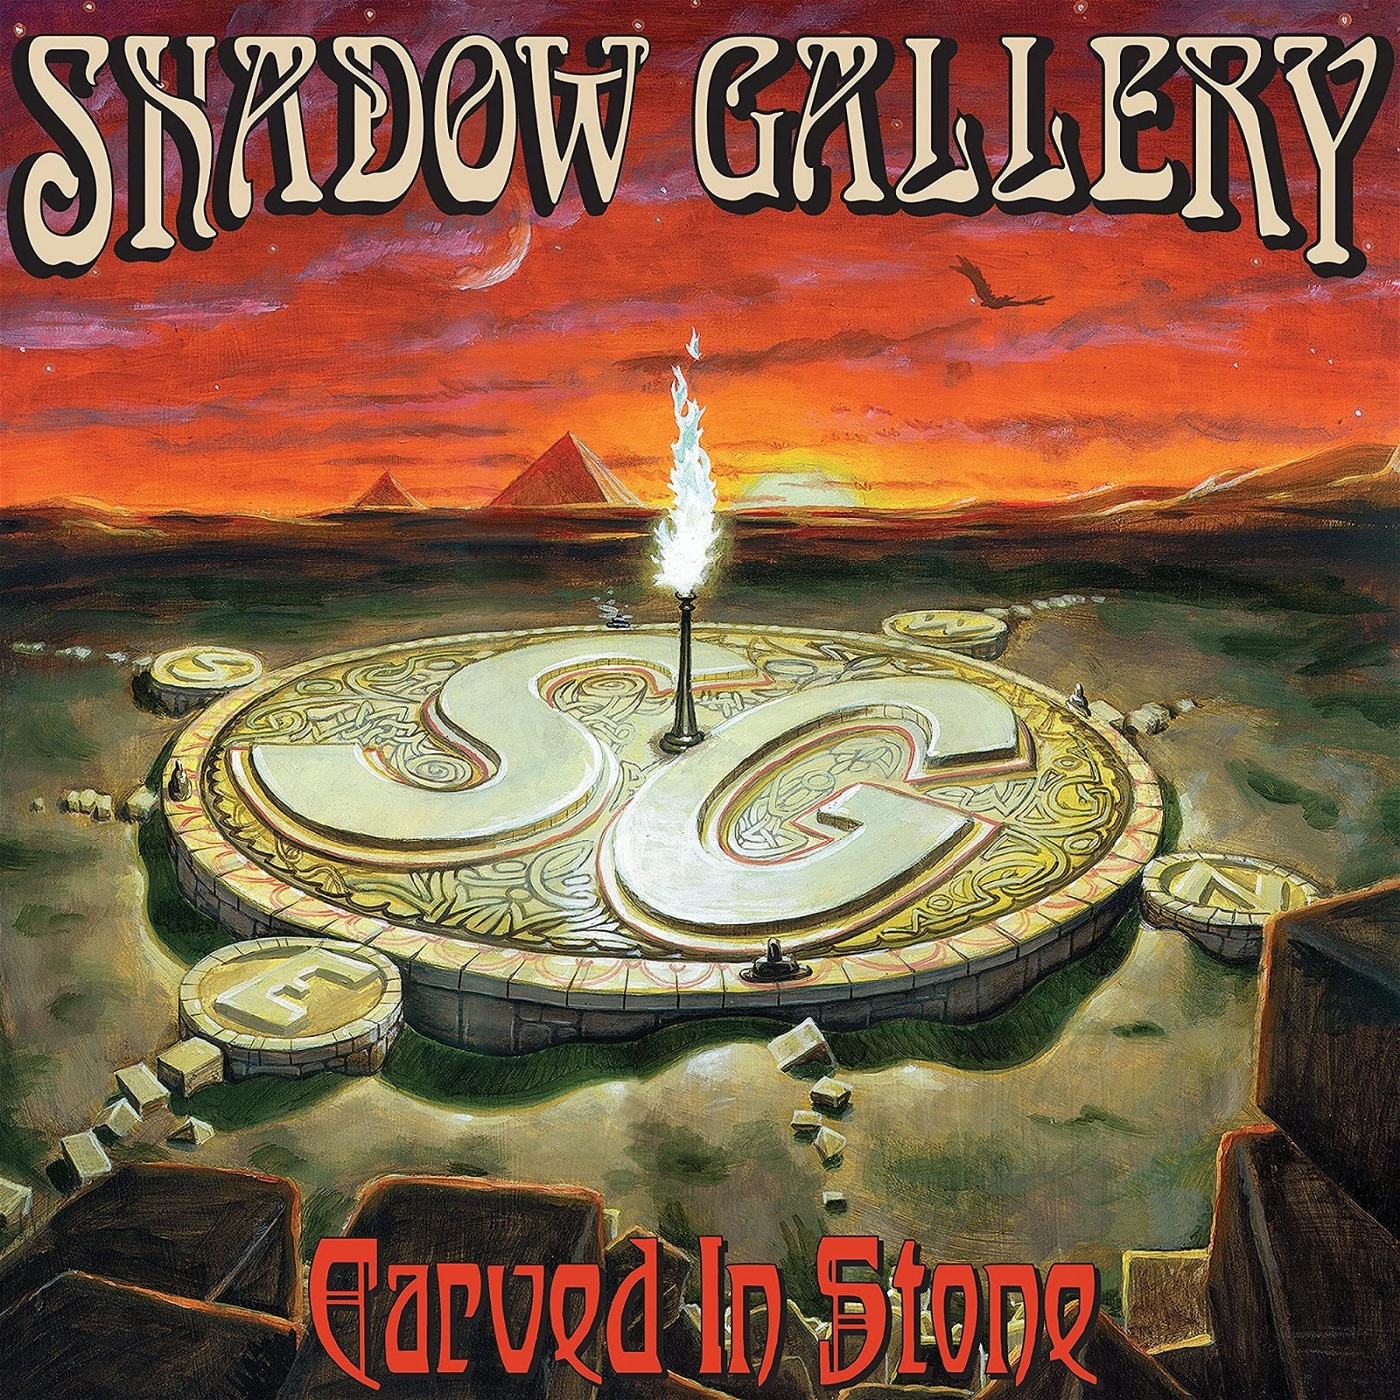 Carved in stone. Shadow Gallery Carved in Stone. Shadow Gallery Band. Shadow Gallery 2001. Shadow Gallery 1992.